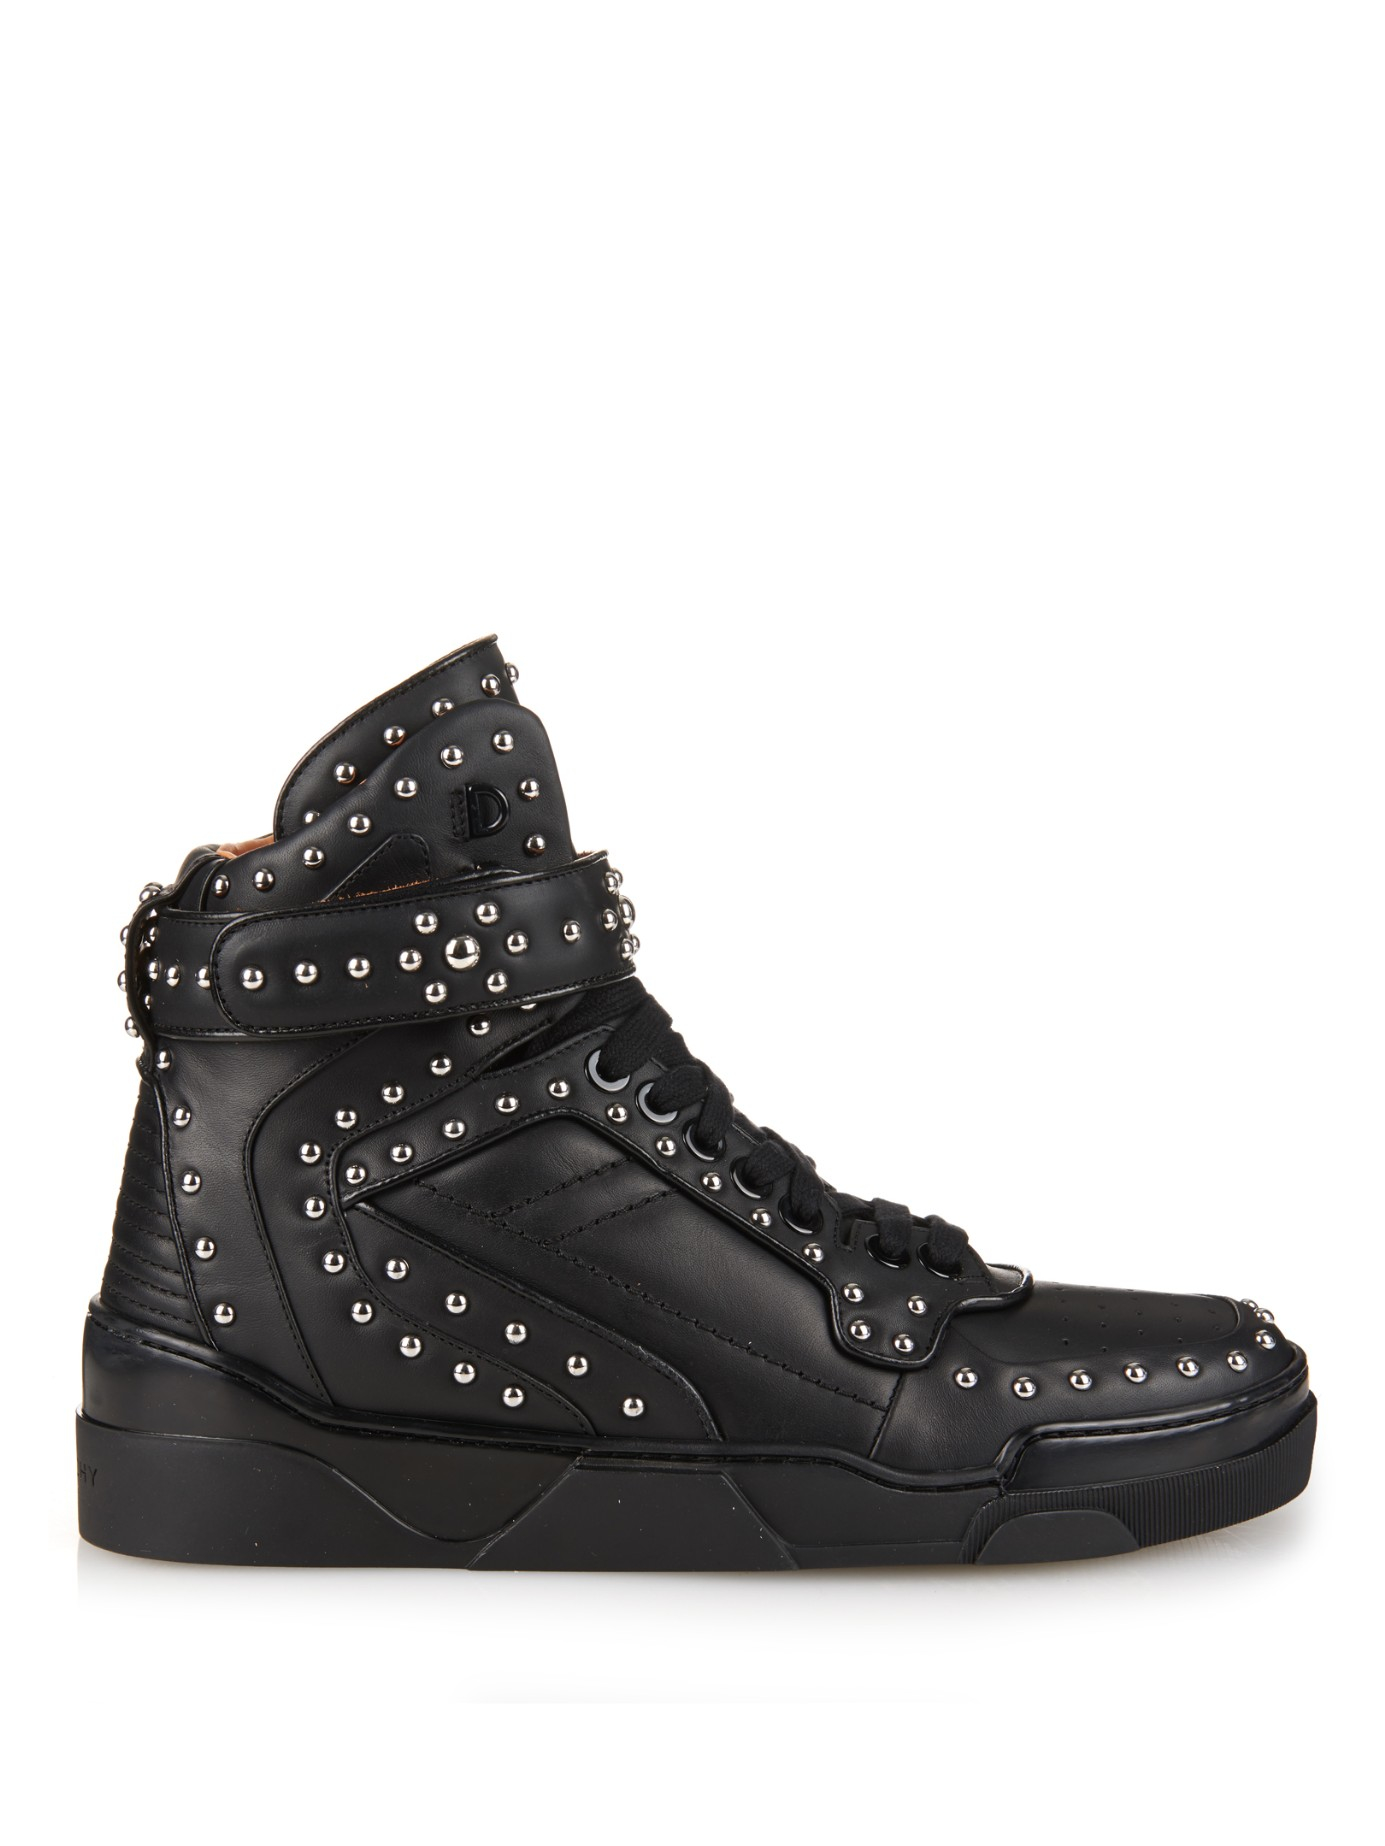 Givenchy Tyson Studded High-Top Leather Trainers in Black for Men | Lyst